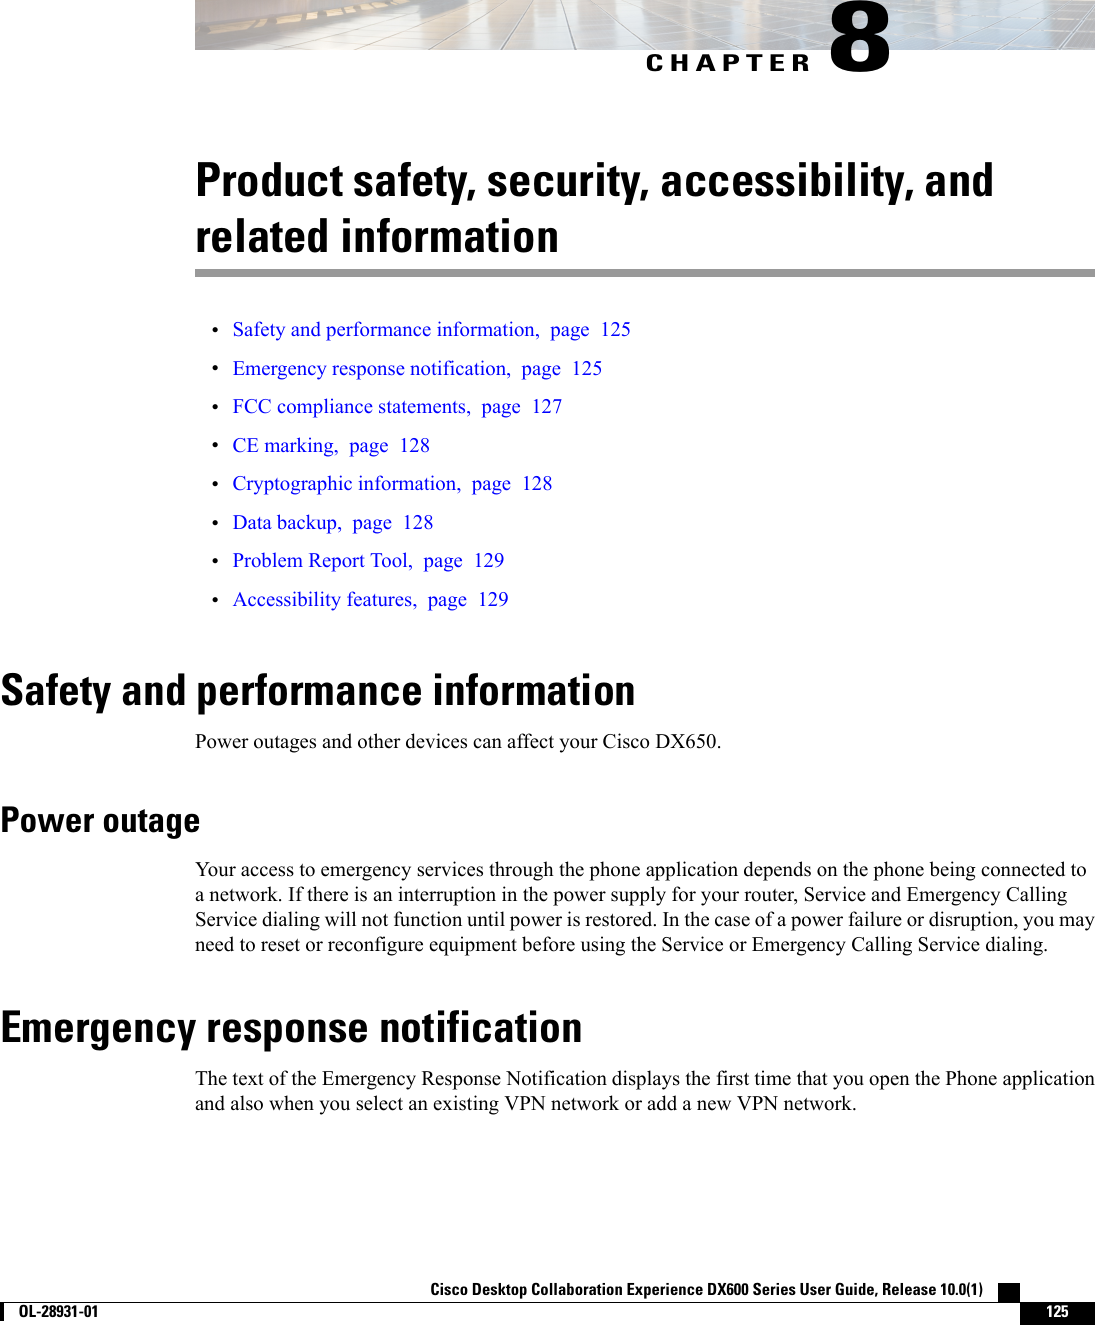 CHAPTER 8Product safety, security, accessibility, andrelated information•Safety and performance information, page 125•Emergency response notification, page 125•FCC compliance statements, page 127•CE marking, page 128•Cryptographic information, page 128•Data backup, page 128•Problem Report Tool, page 129•Accessibility features, page 129Safety and performance informationPower outages and other devices can affect your Cisco DX650.Power outageYour access to emergency services through the phone application depends on the phone being connected toa network. If there is an interruption in the power supply for your router, Service and Emergency CallingService dialing will not function until power is restored. In the case of a power failure or disruption, you mayneed to reset or reconfigure equipment before using the Service or Emergency Calling Service dialing.Emergency response notificationThe text of the Emergency Response Notification displays the first time that you open the Phone applicationand also when you select an existing VPN network or add a new VPN network.Cisco Desktop Collaboration Experience DX600 Series User Guide, Release 10.0(1)        OL-28931-01 125